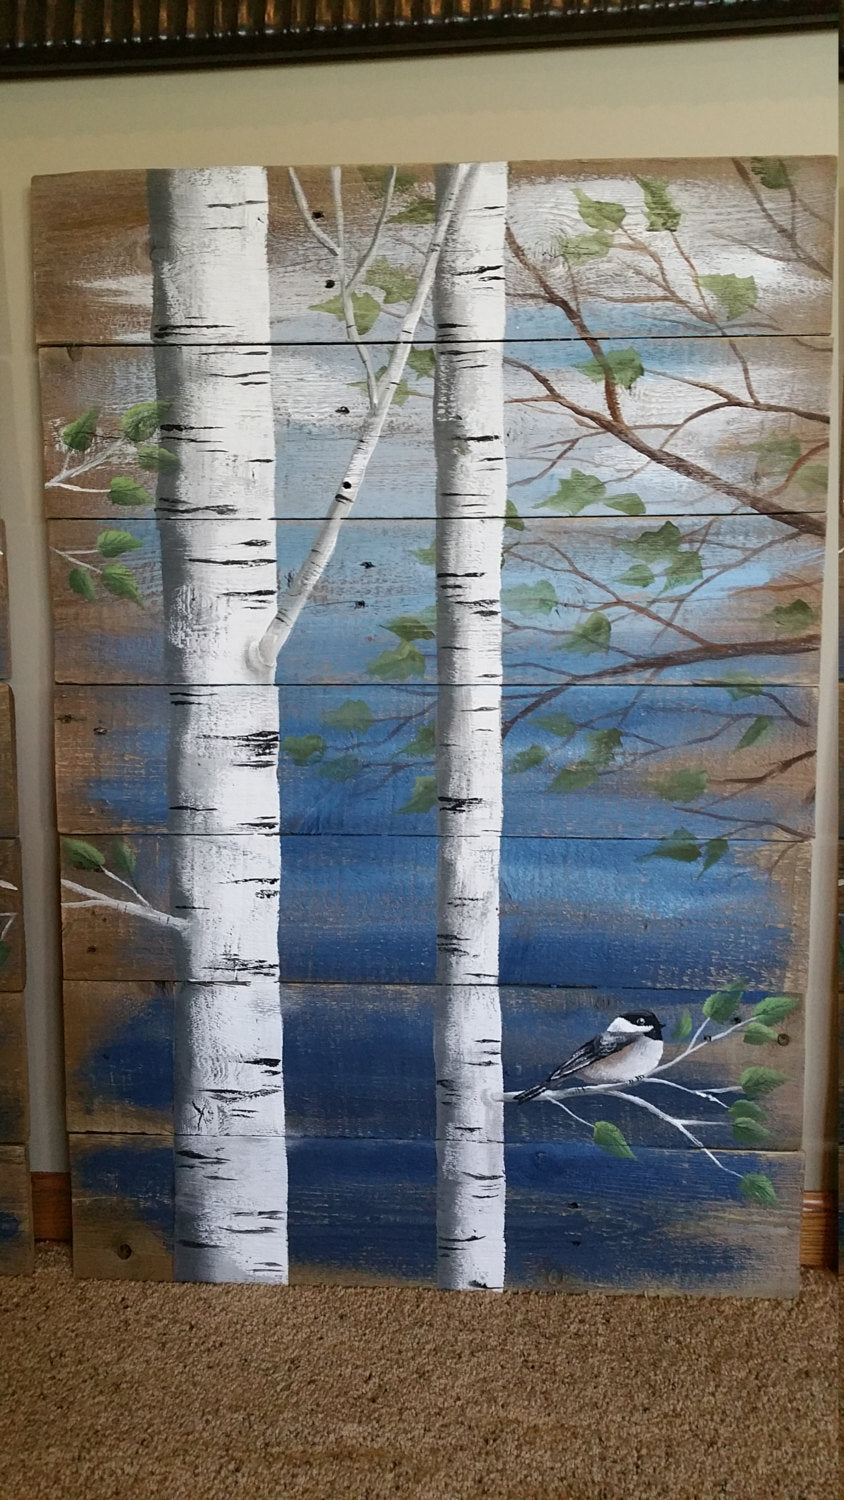 Hand painted White Birch 4 Piece Pallet art, 9' wide total, Couch Art